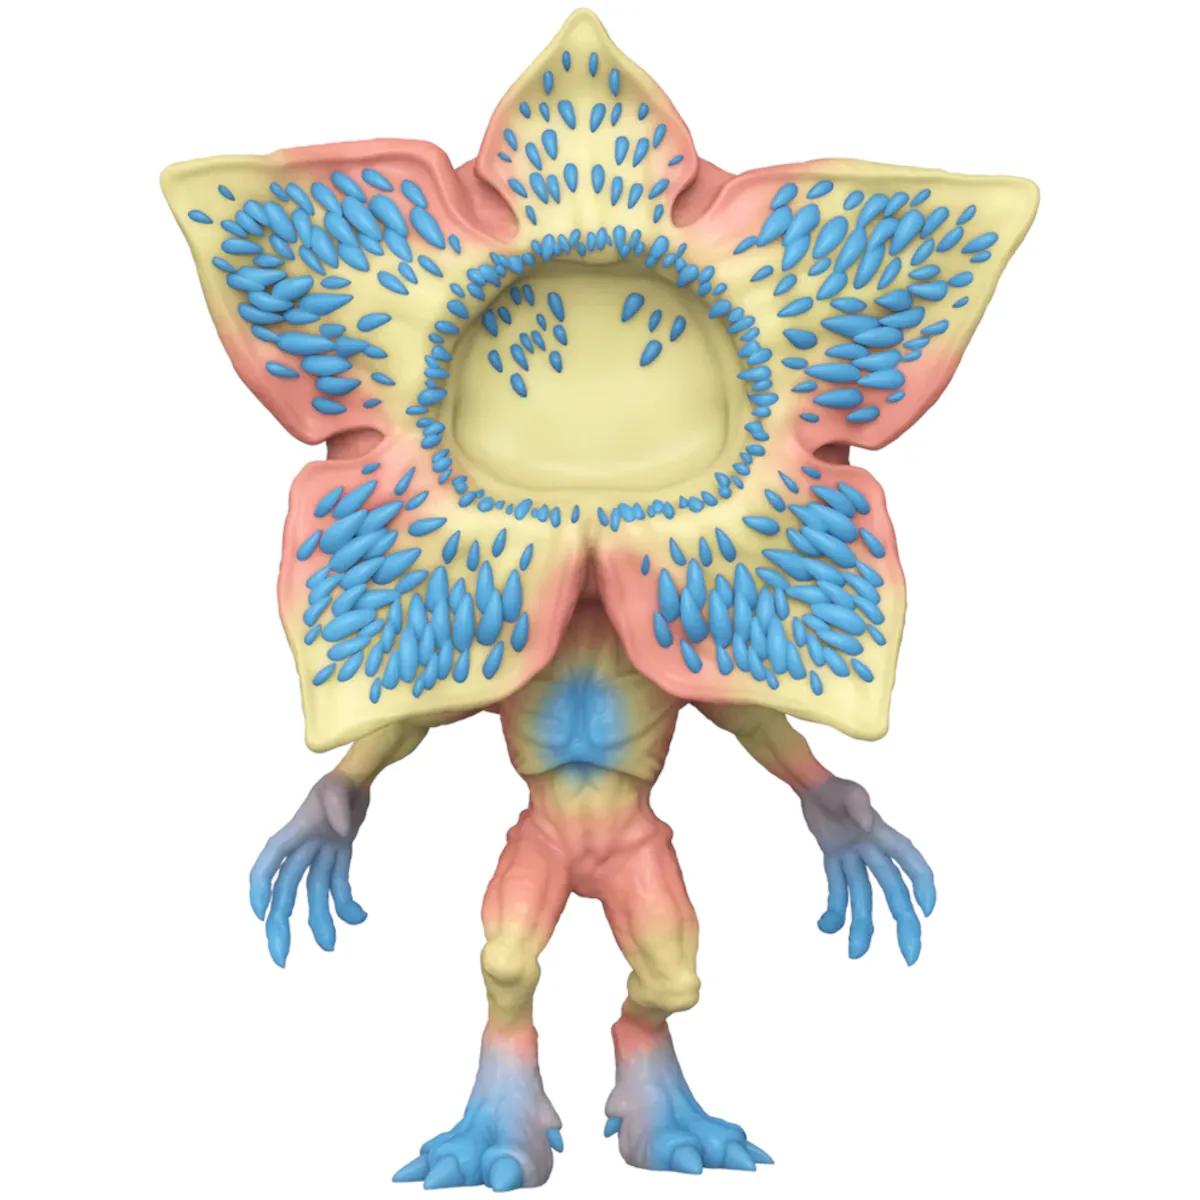 79996 Funko Pop! Television - Stranger Things - Demogorgon (Scoops Ahoy) Super Sized Collectable Vinyl Figure